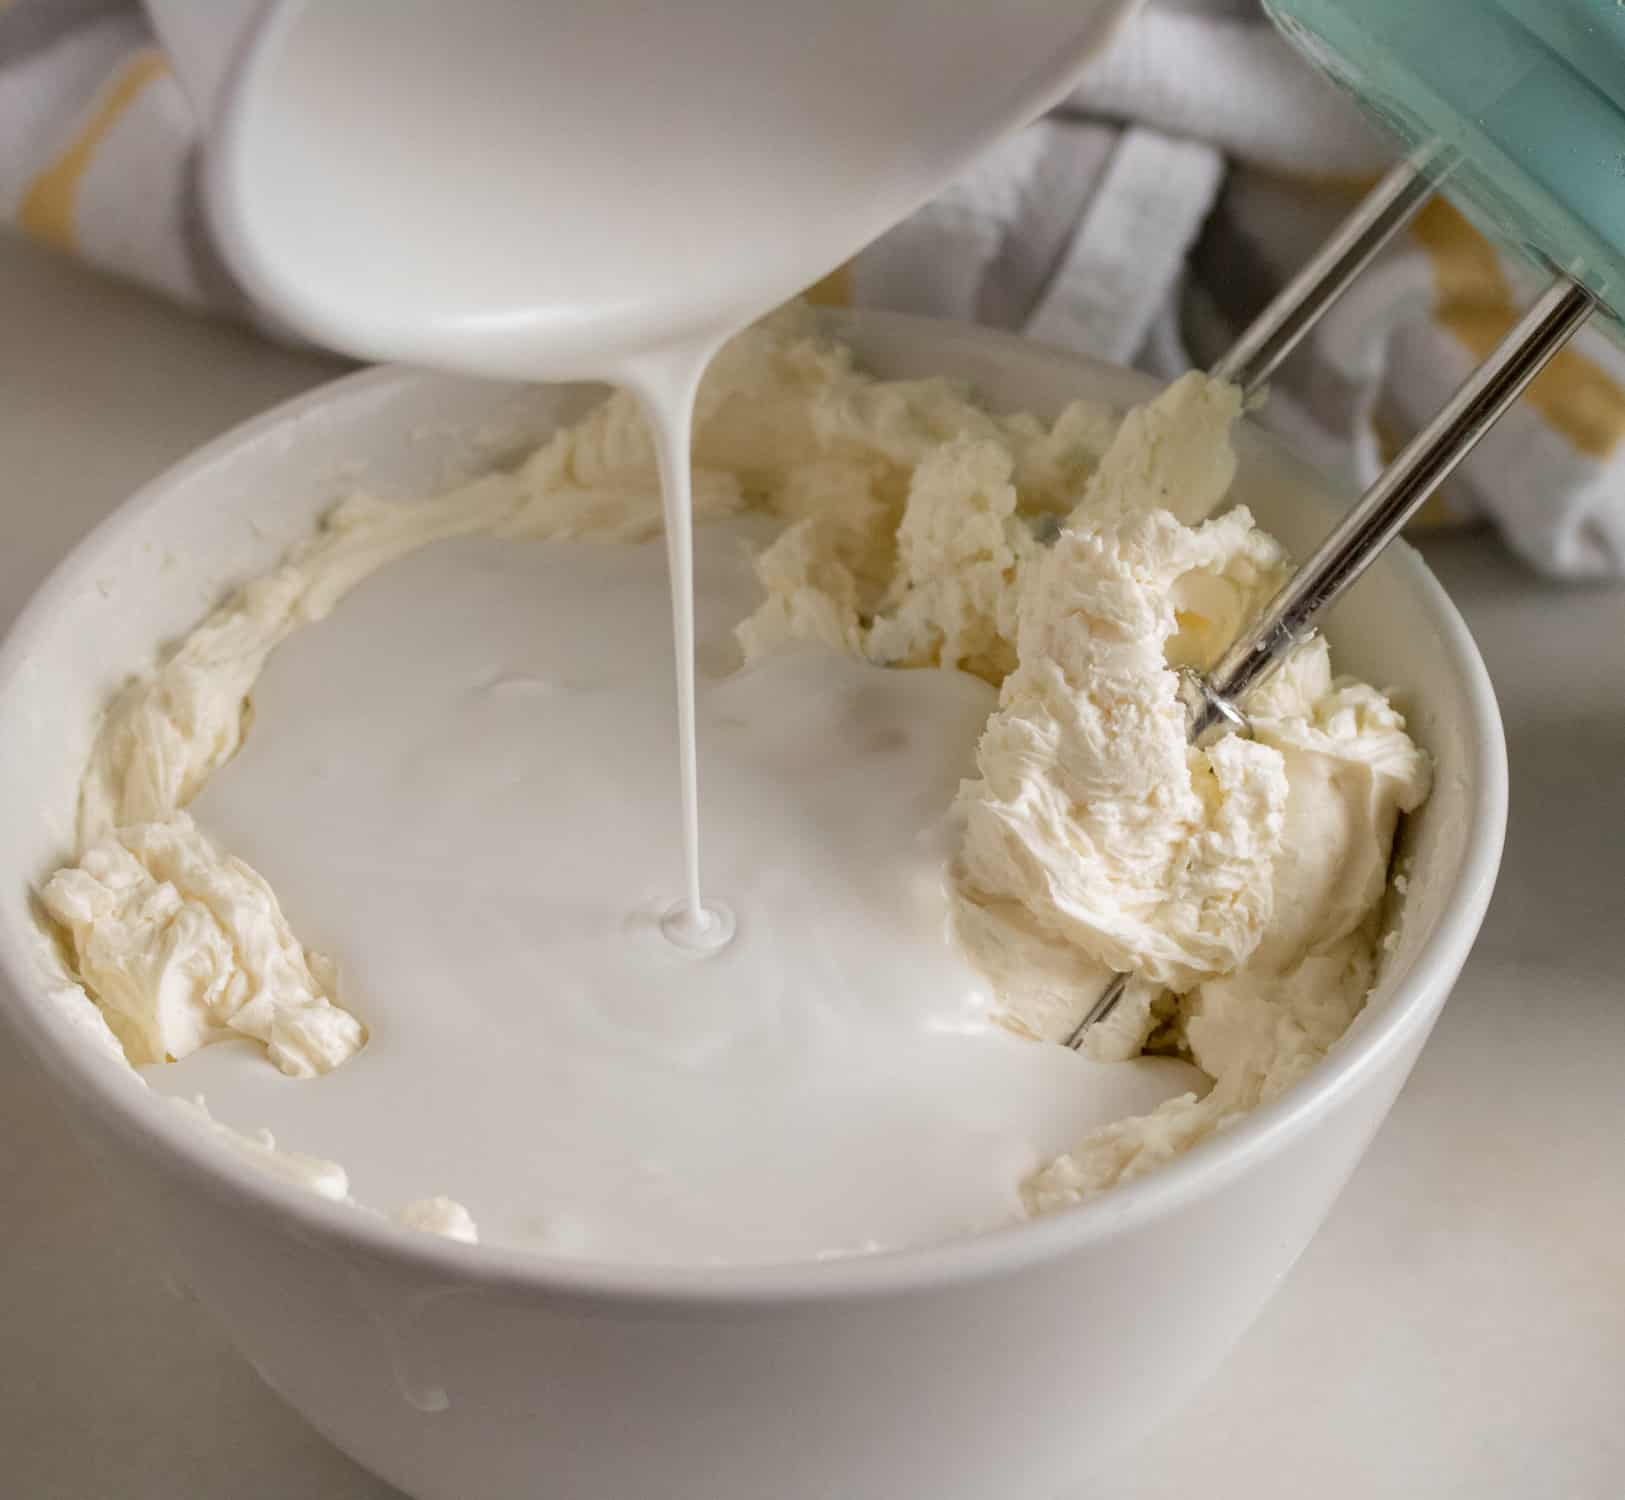 Coconut cream being added to whipped cream cheese in a white bowl with an electric mixer and striped towel in background